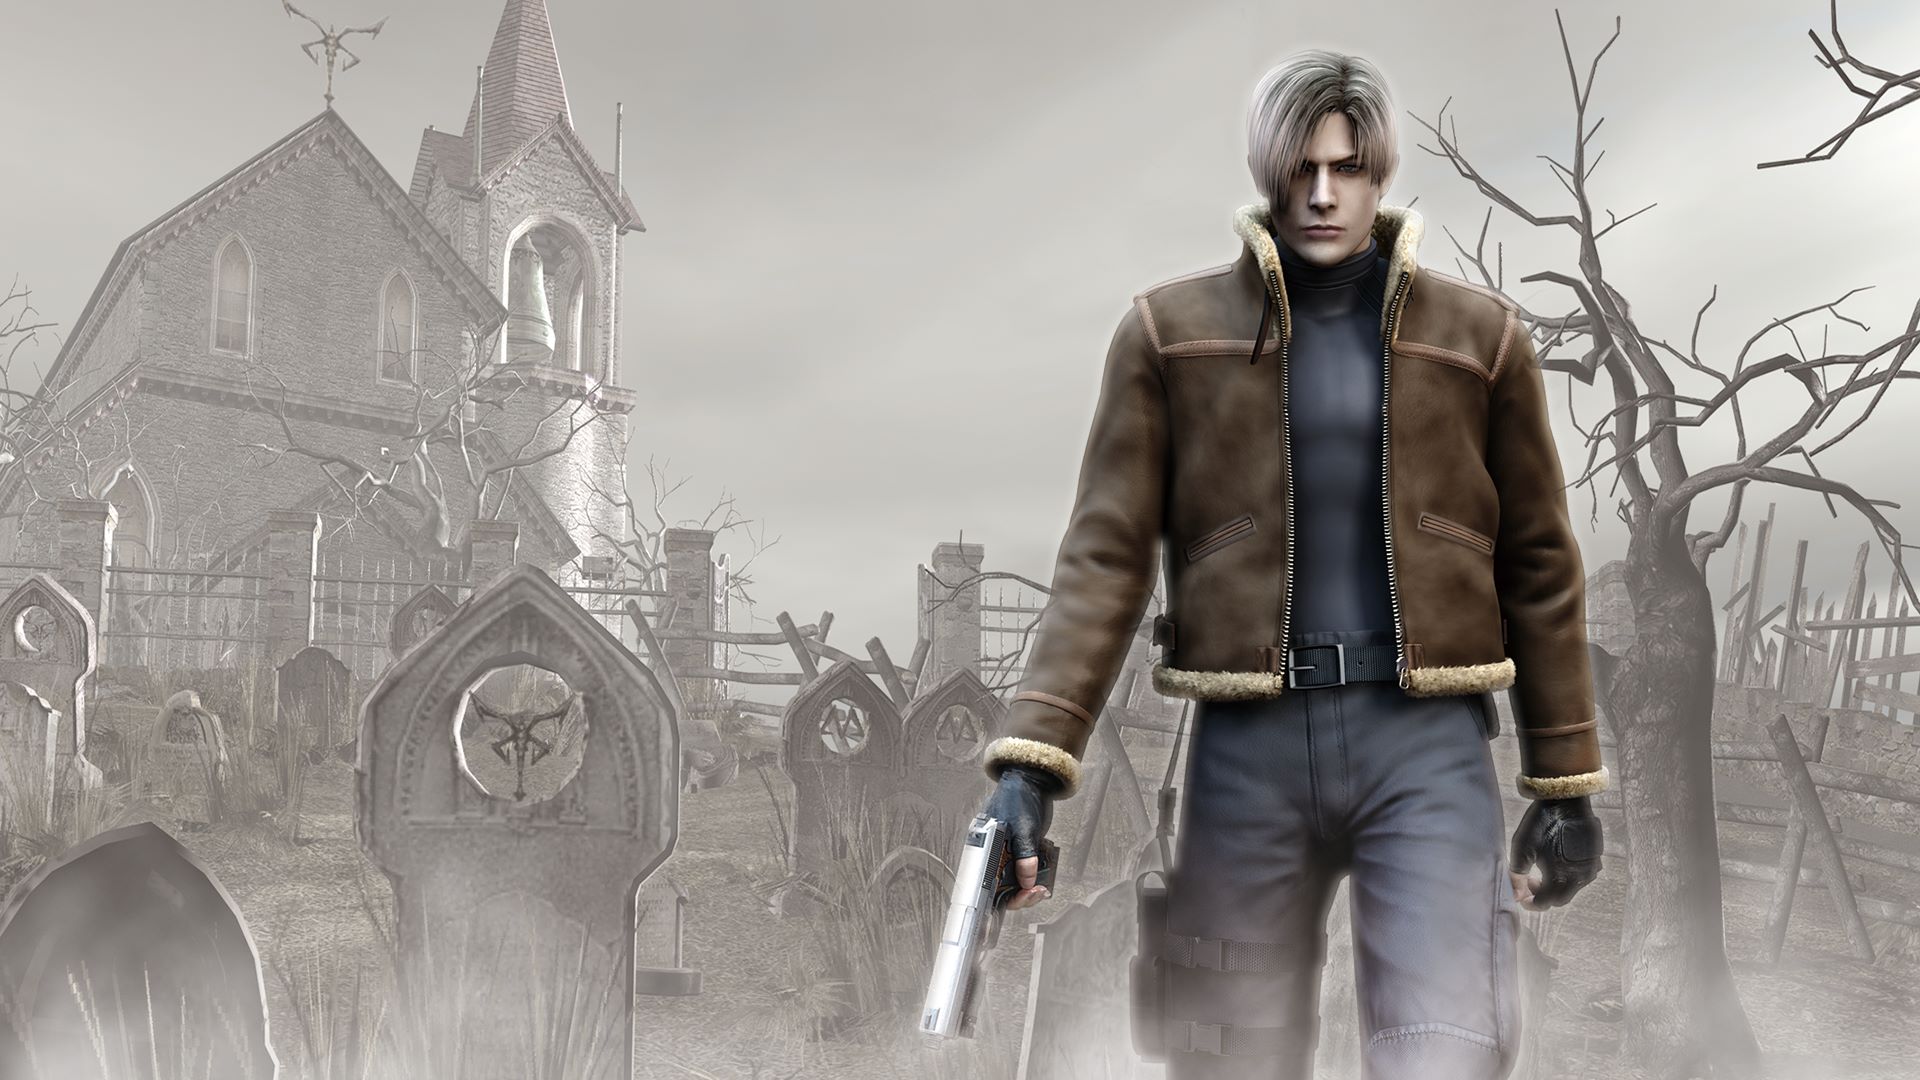 Nintendo Switch Resident Evil games include RE4